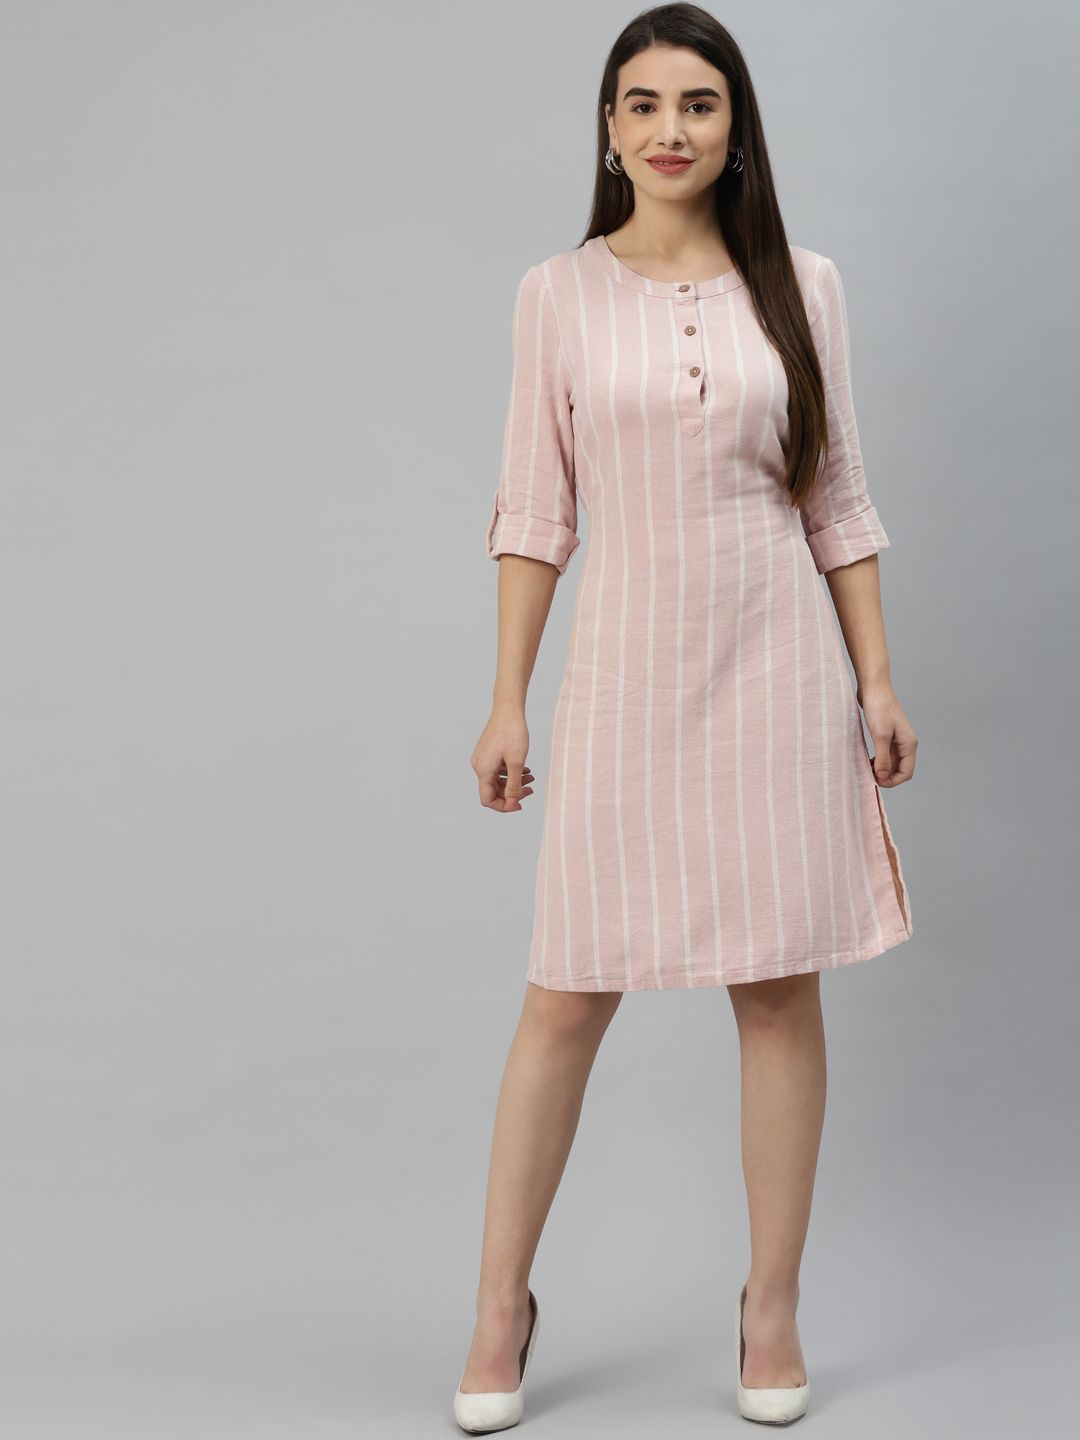 Marks & Spencer Pink & Off-White Striped A-Line Dress Price in India